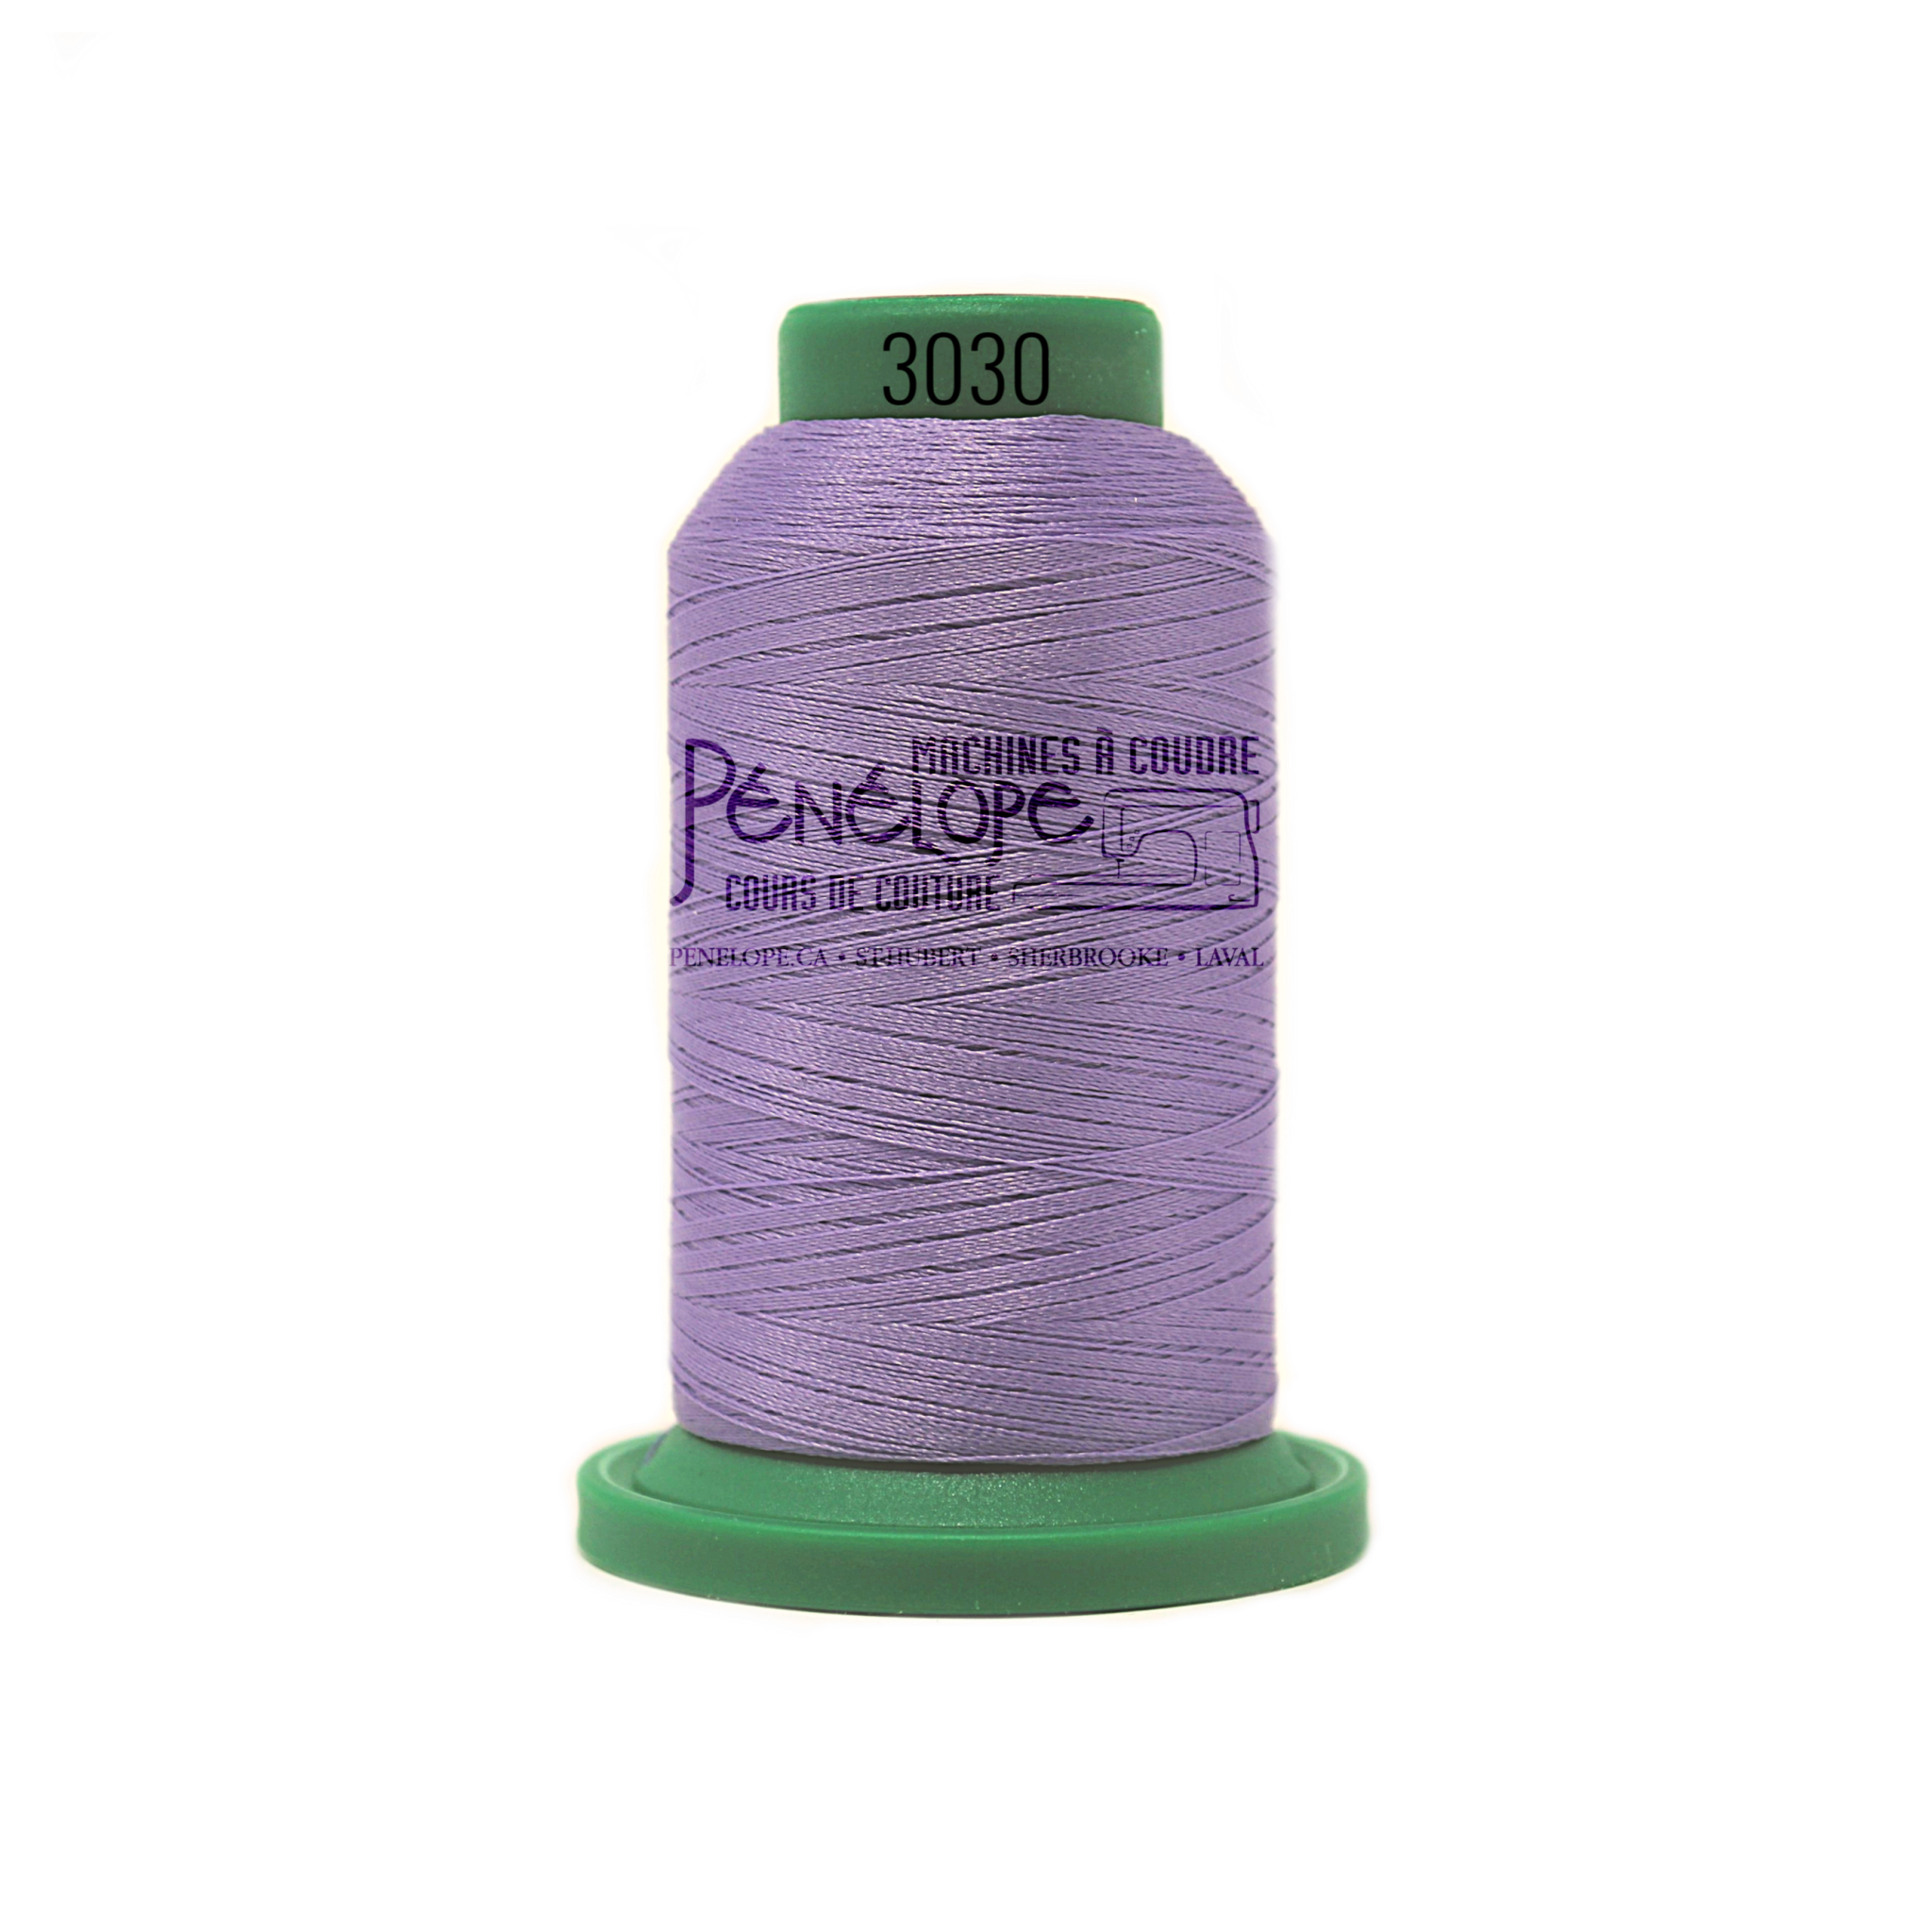 Isacord Isacord sewing and embroidery thread 3030